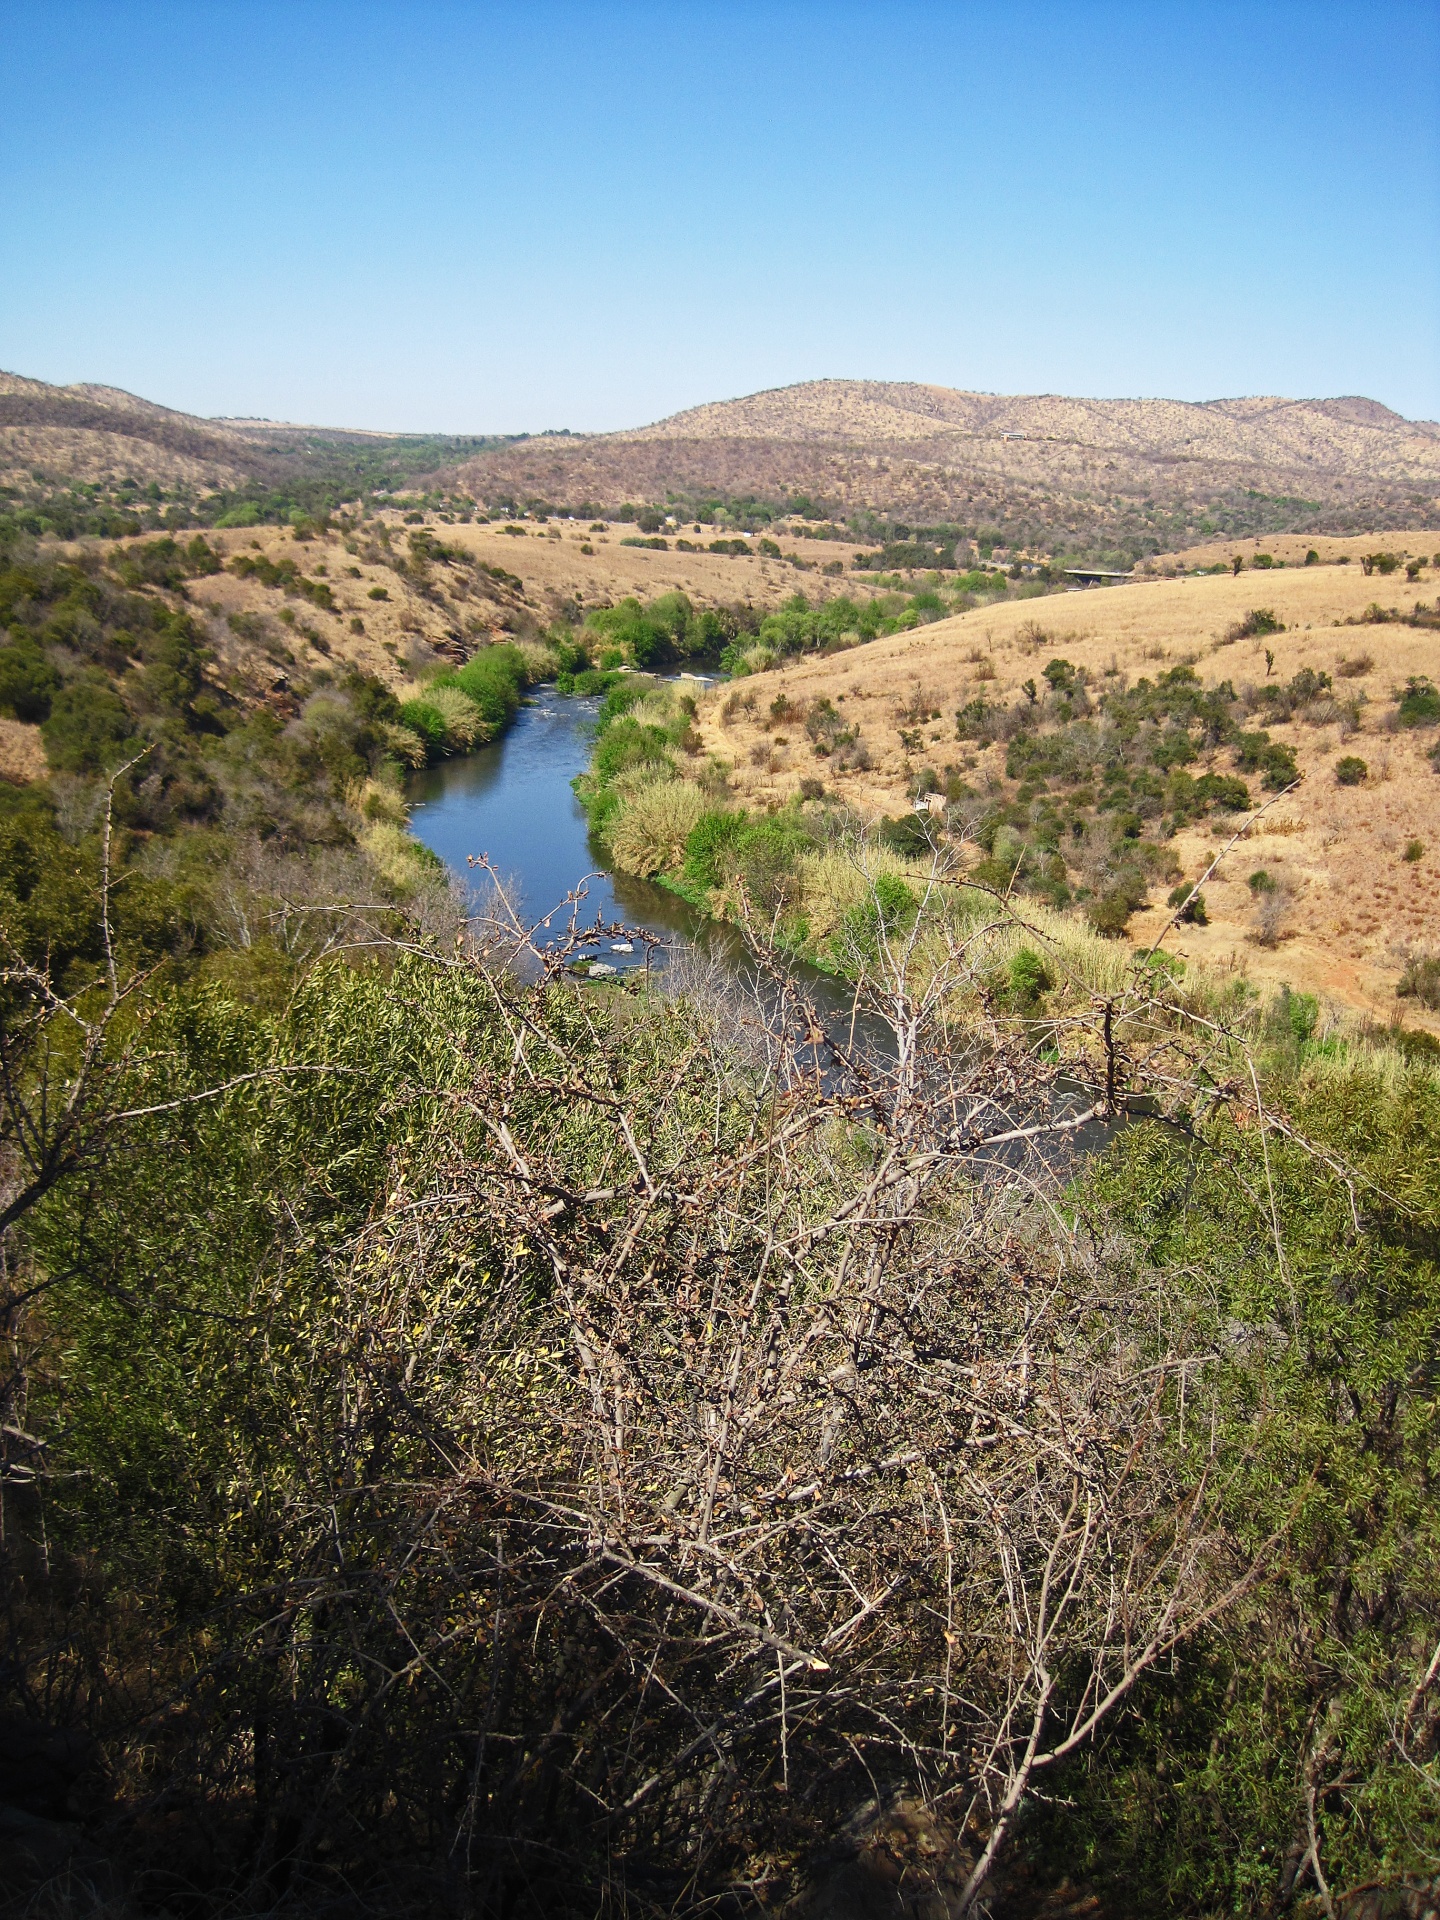 view of a curving river between hills in a south african landscape at the end of winter flanked by green vegetation